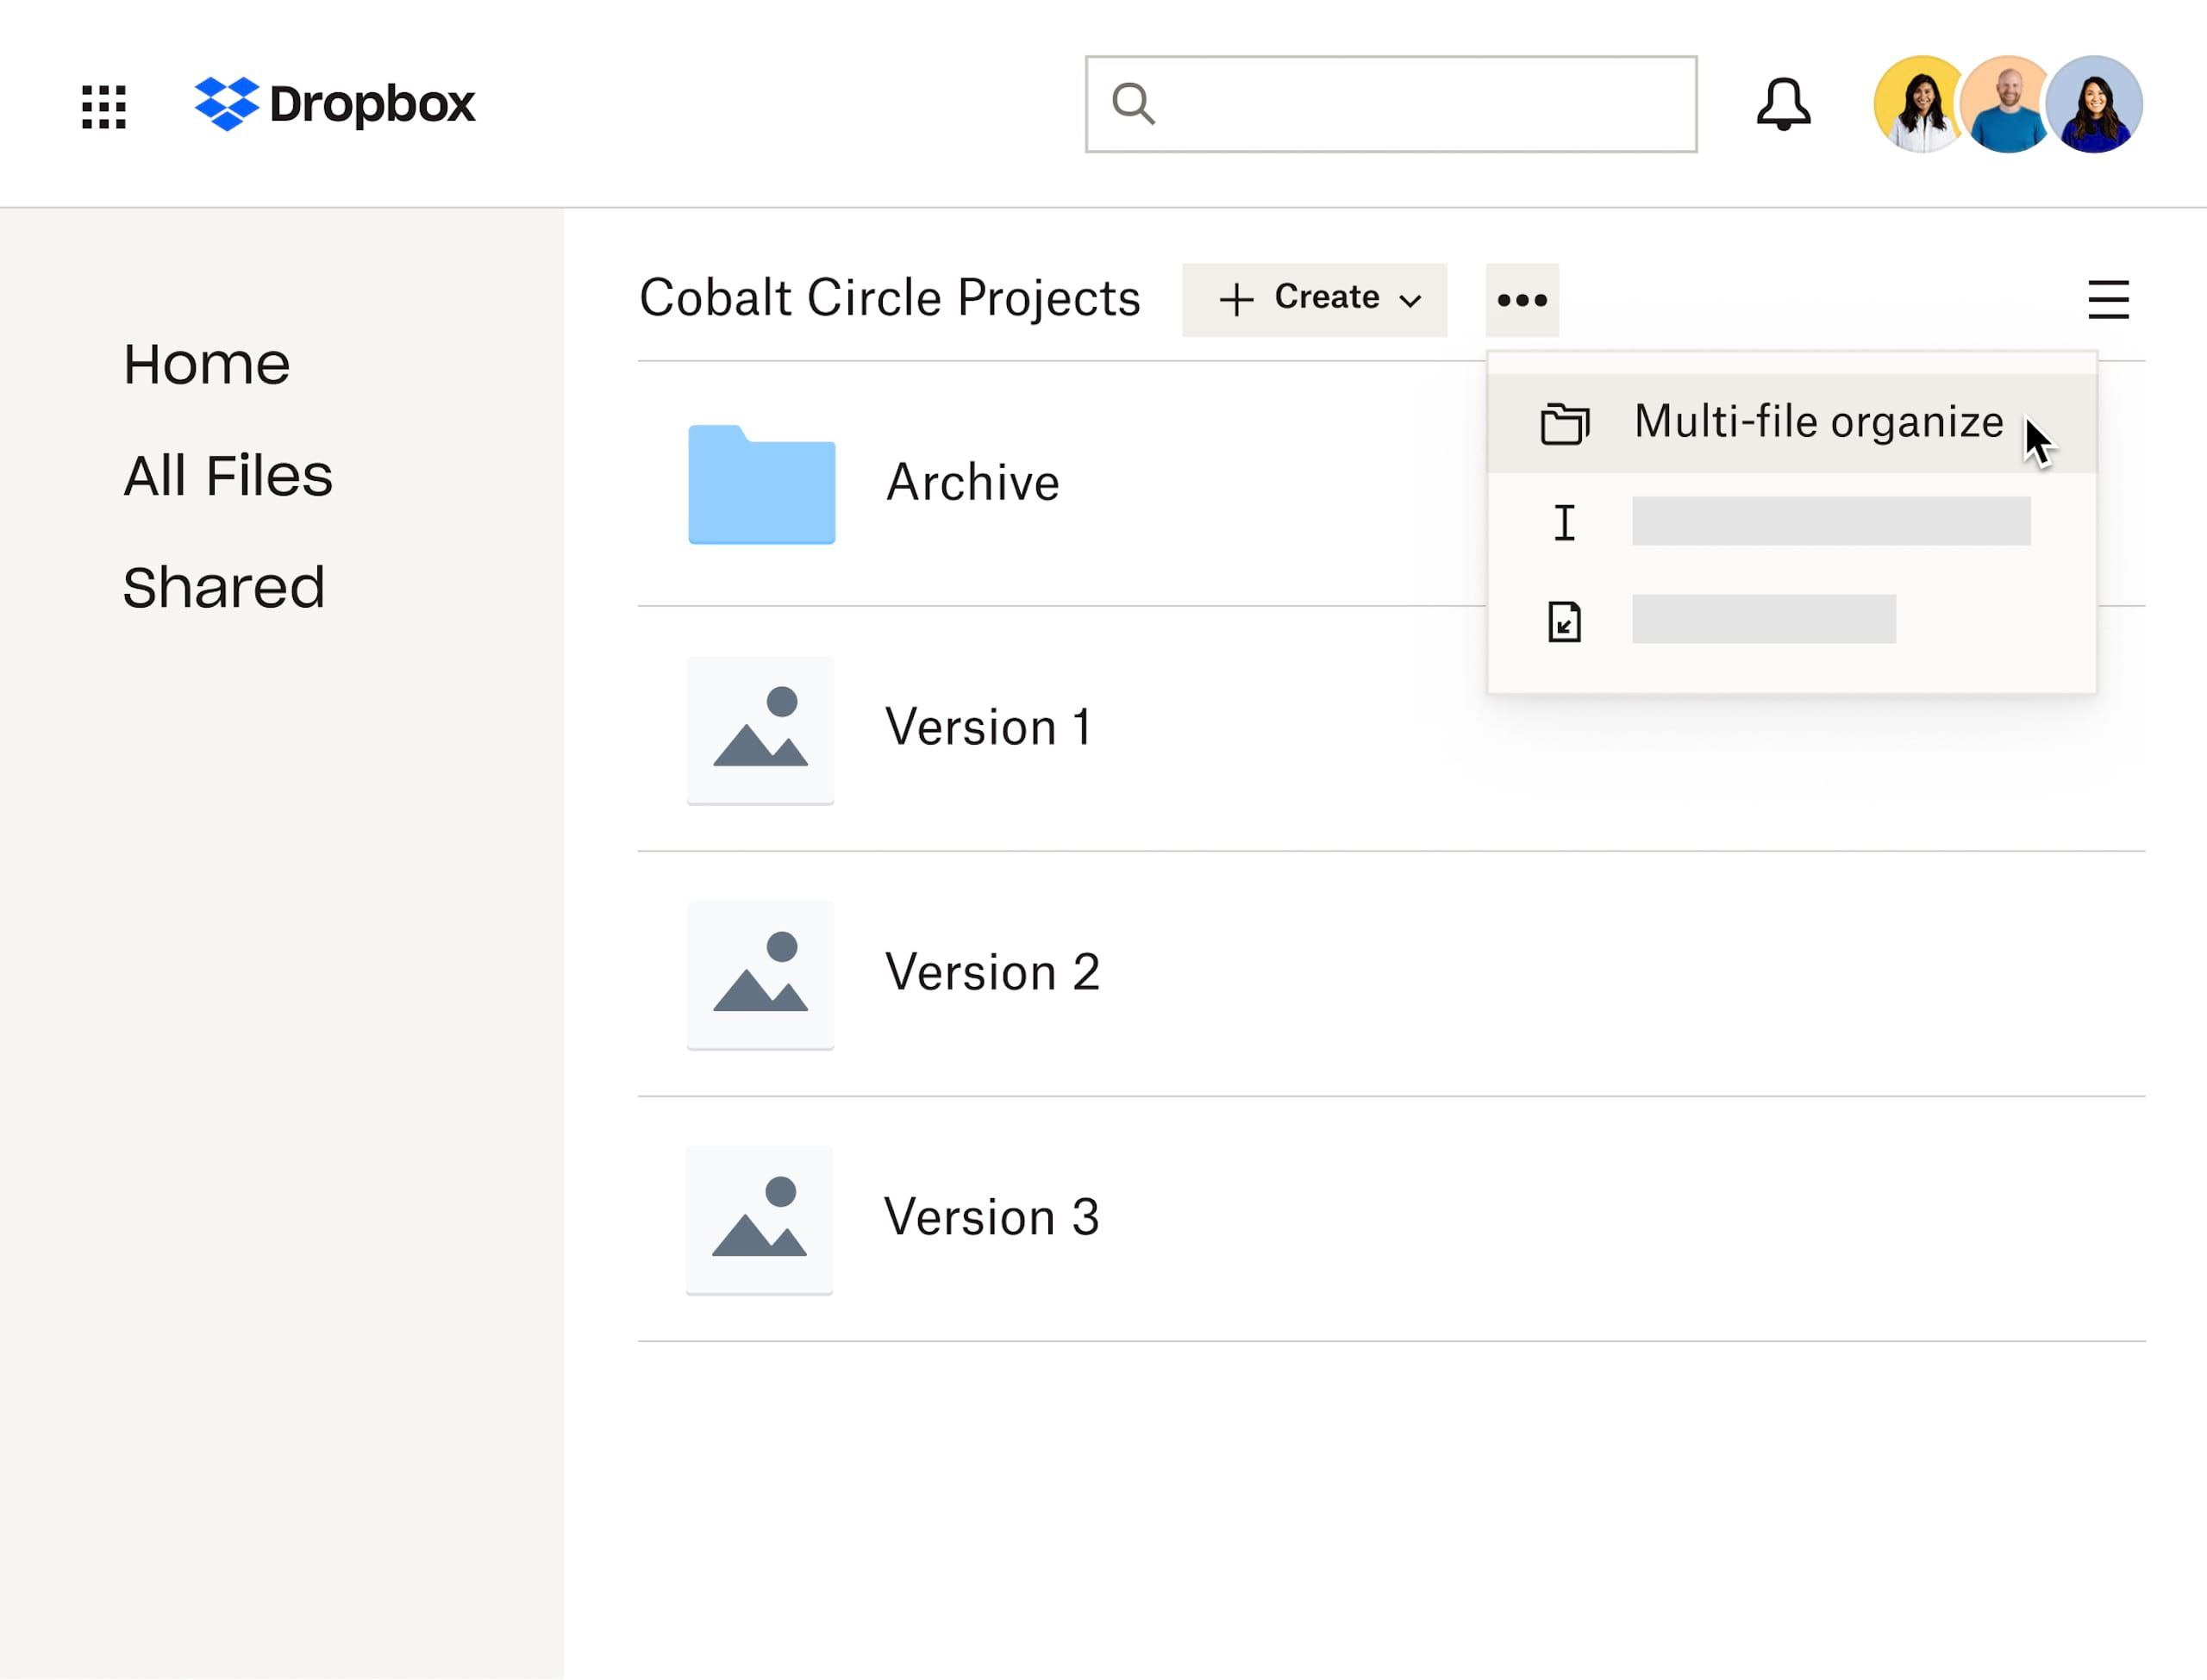 A user selecting the Multi-file organize option in a dropdown within a Dropbox folder